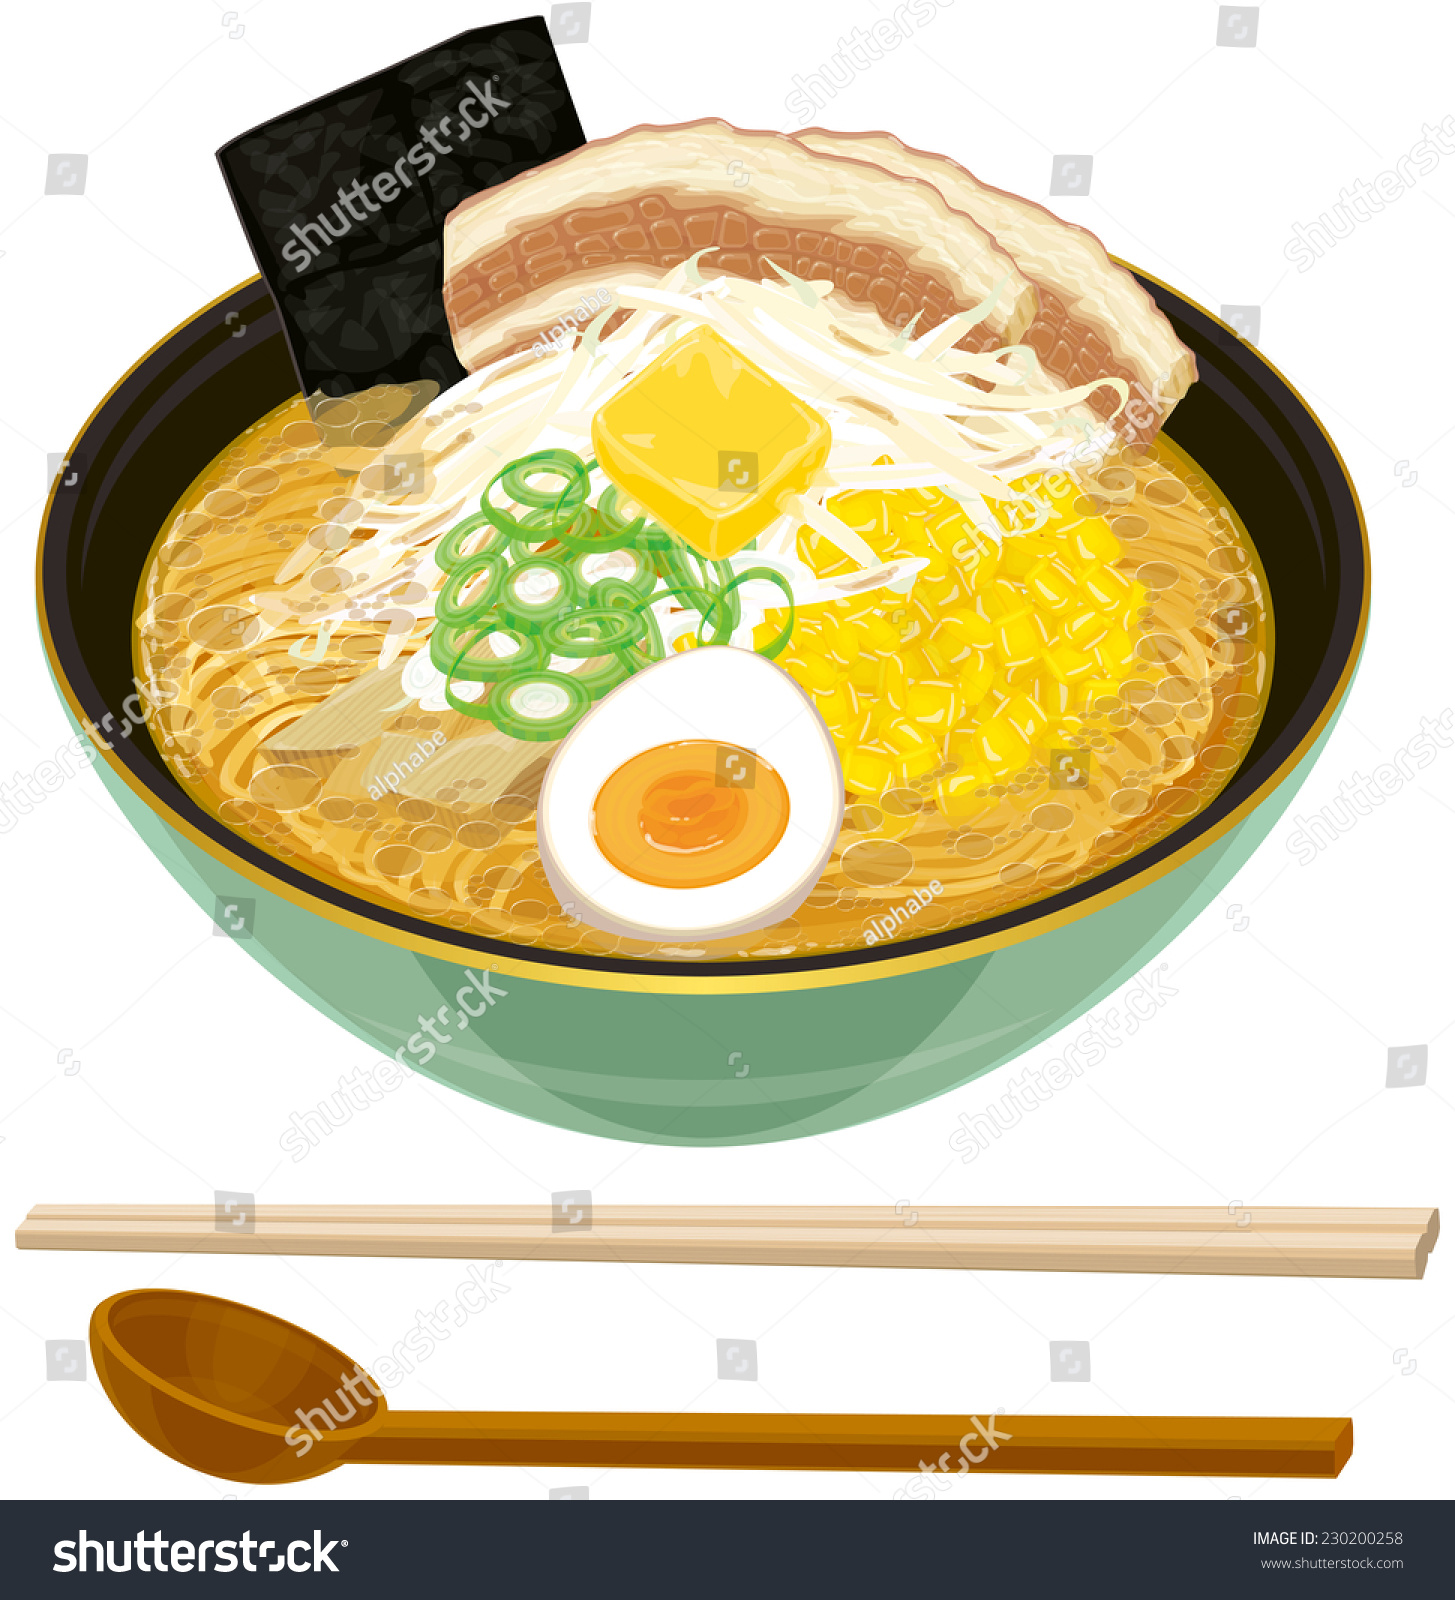 Ramen Miso Based Soupjapanese Noodle Stock Vector Royalty Free Shutterstock